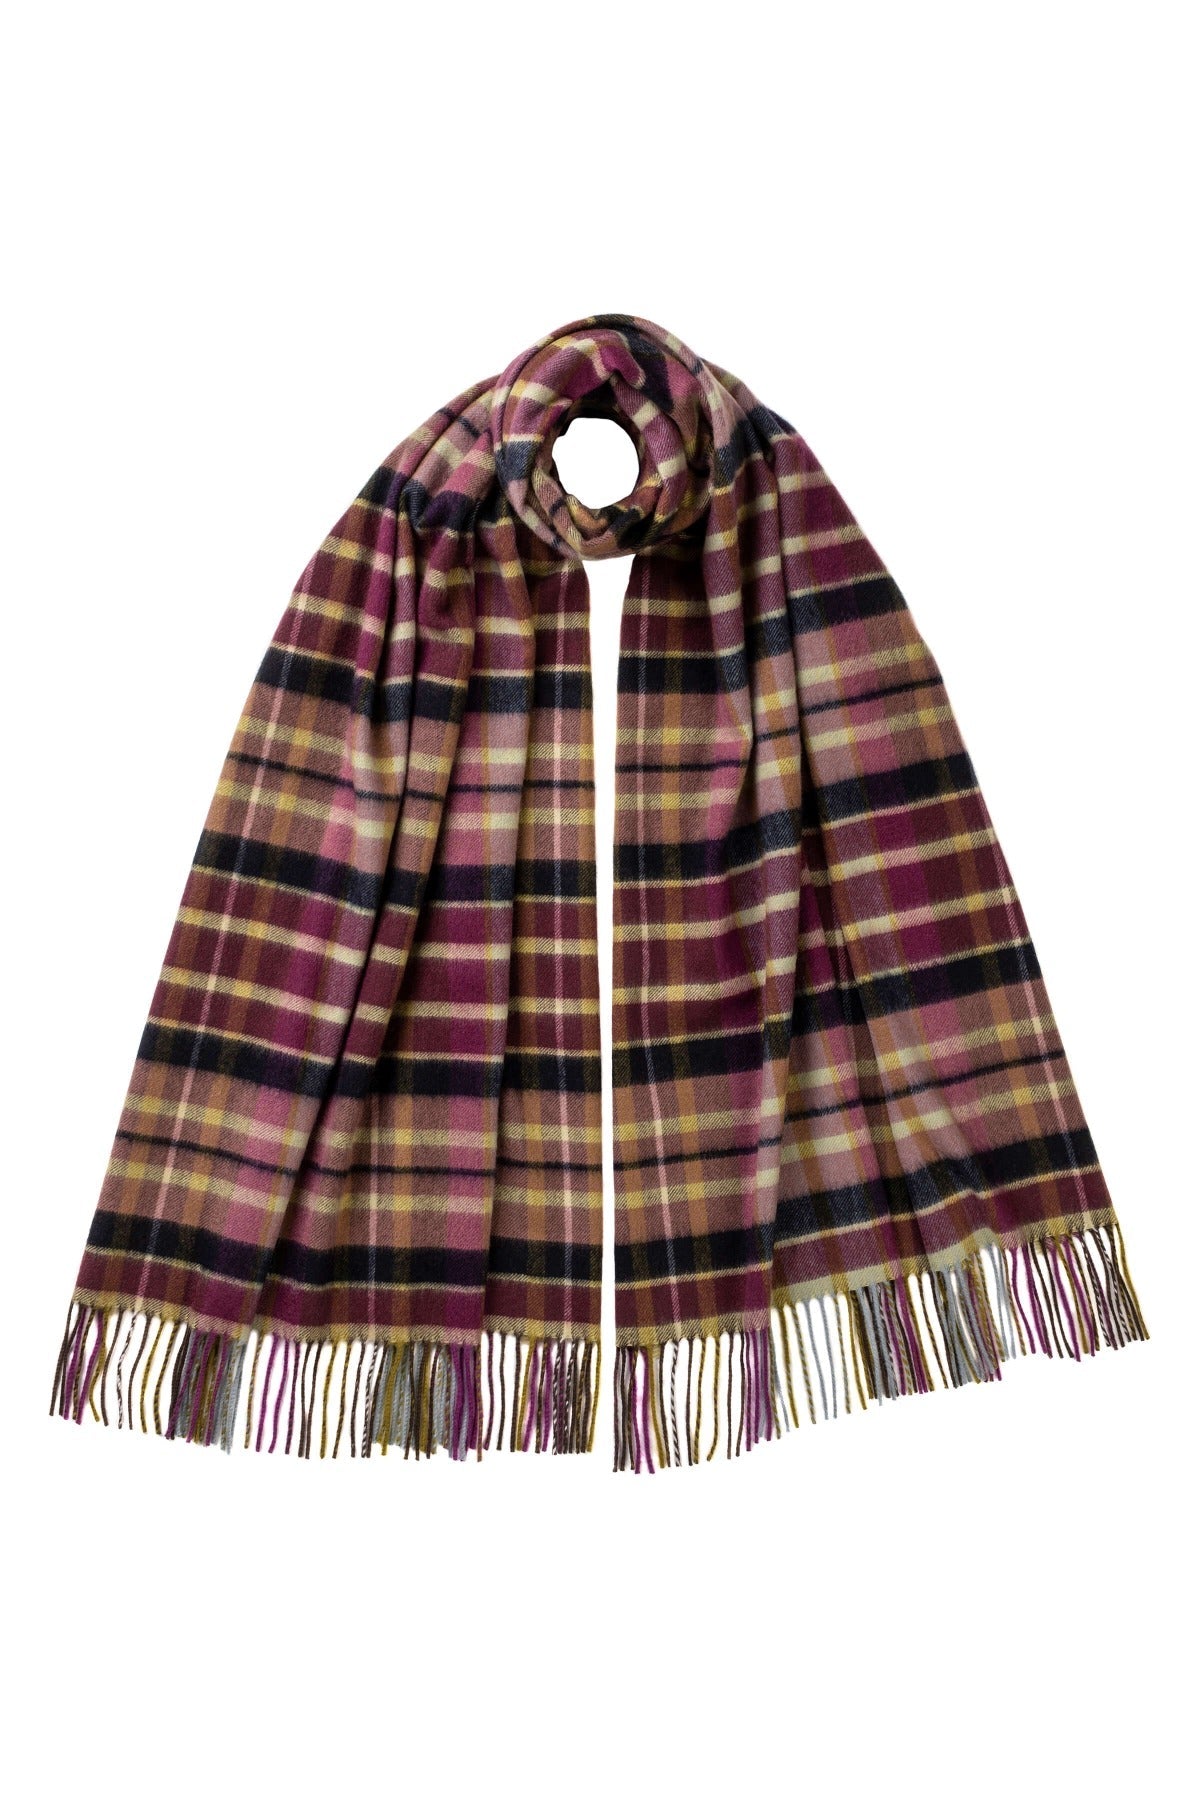 Johnstons of Elgin Cashmere Stole in Moorland Thistle Check on a white background WA000056RU7187